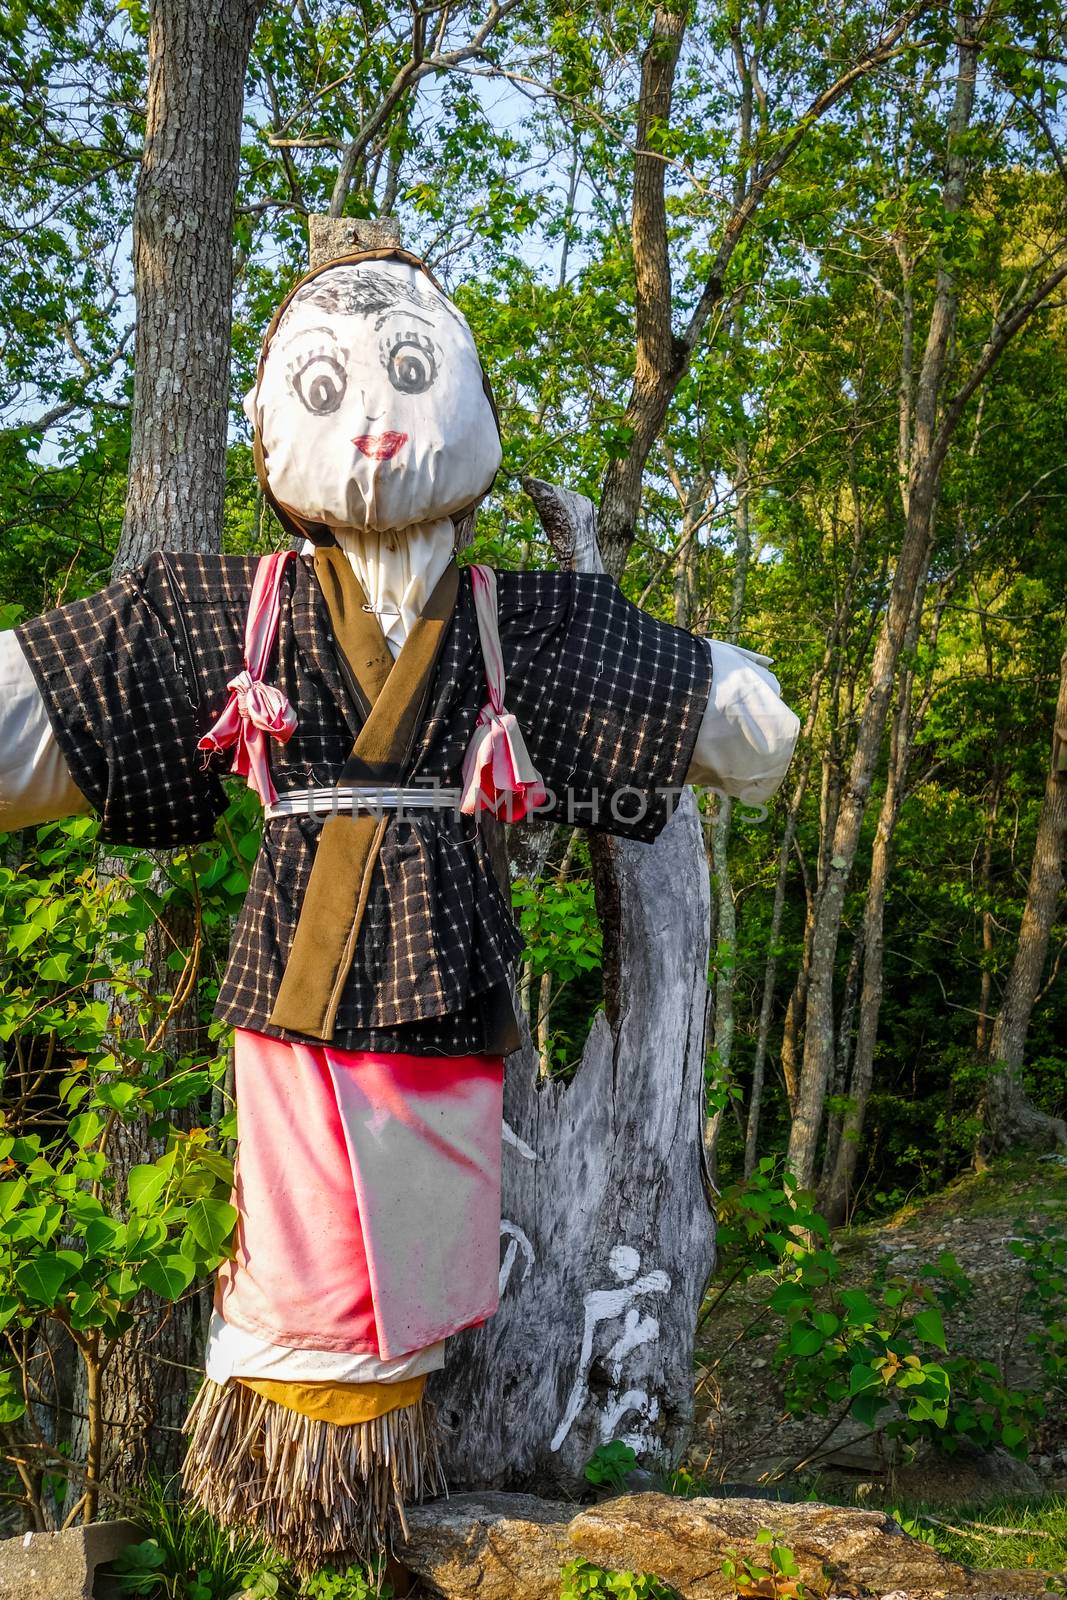 Japanese scarecrow in Nara Park, Japan by daboost